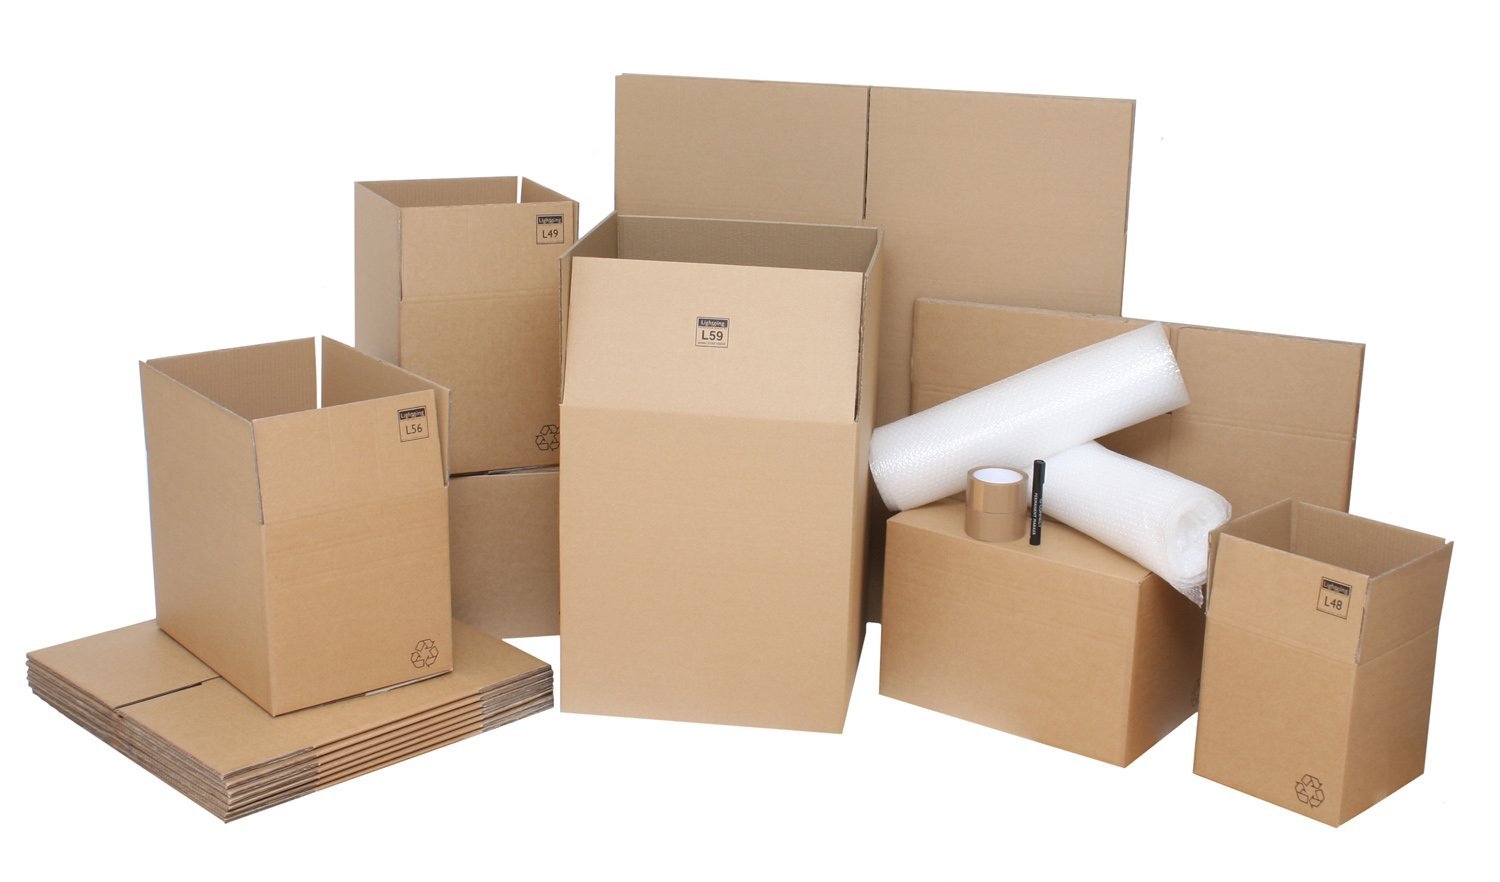 ECONOMY HOUSE MOVING CARDBOARD BOX REMOVAL MOVING PACKING BOXES KITS *ALL SIZES* 